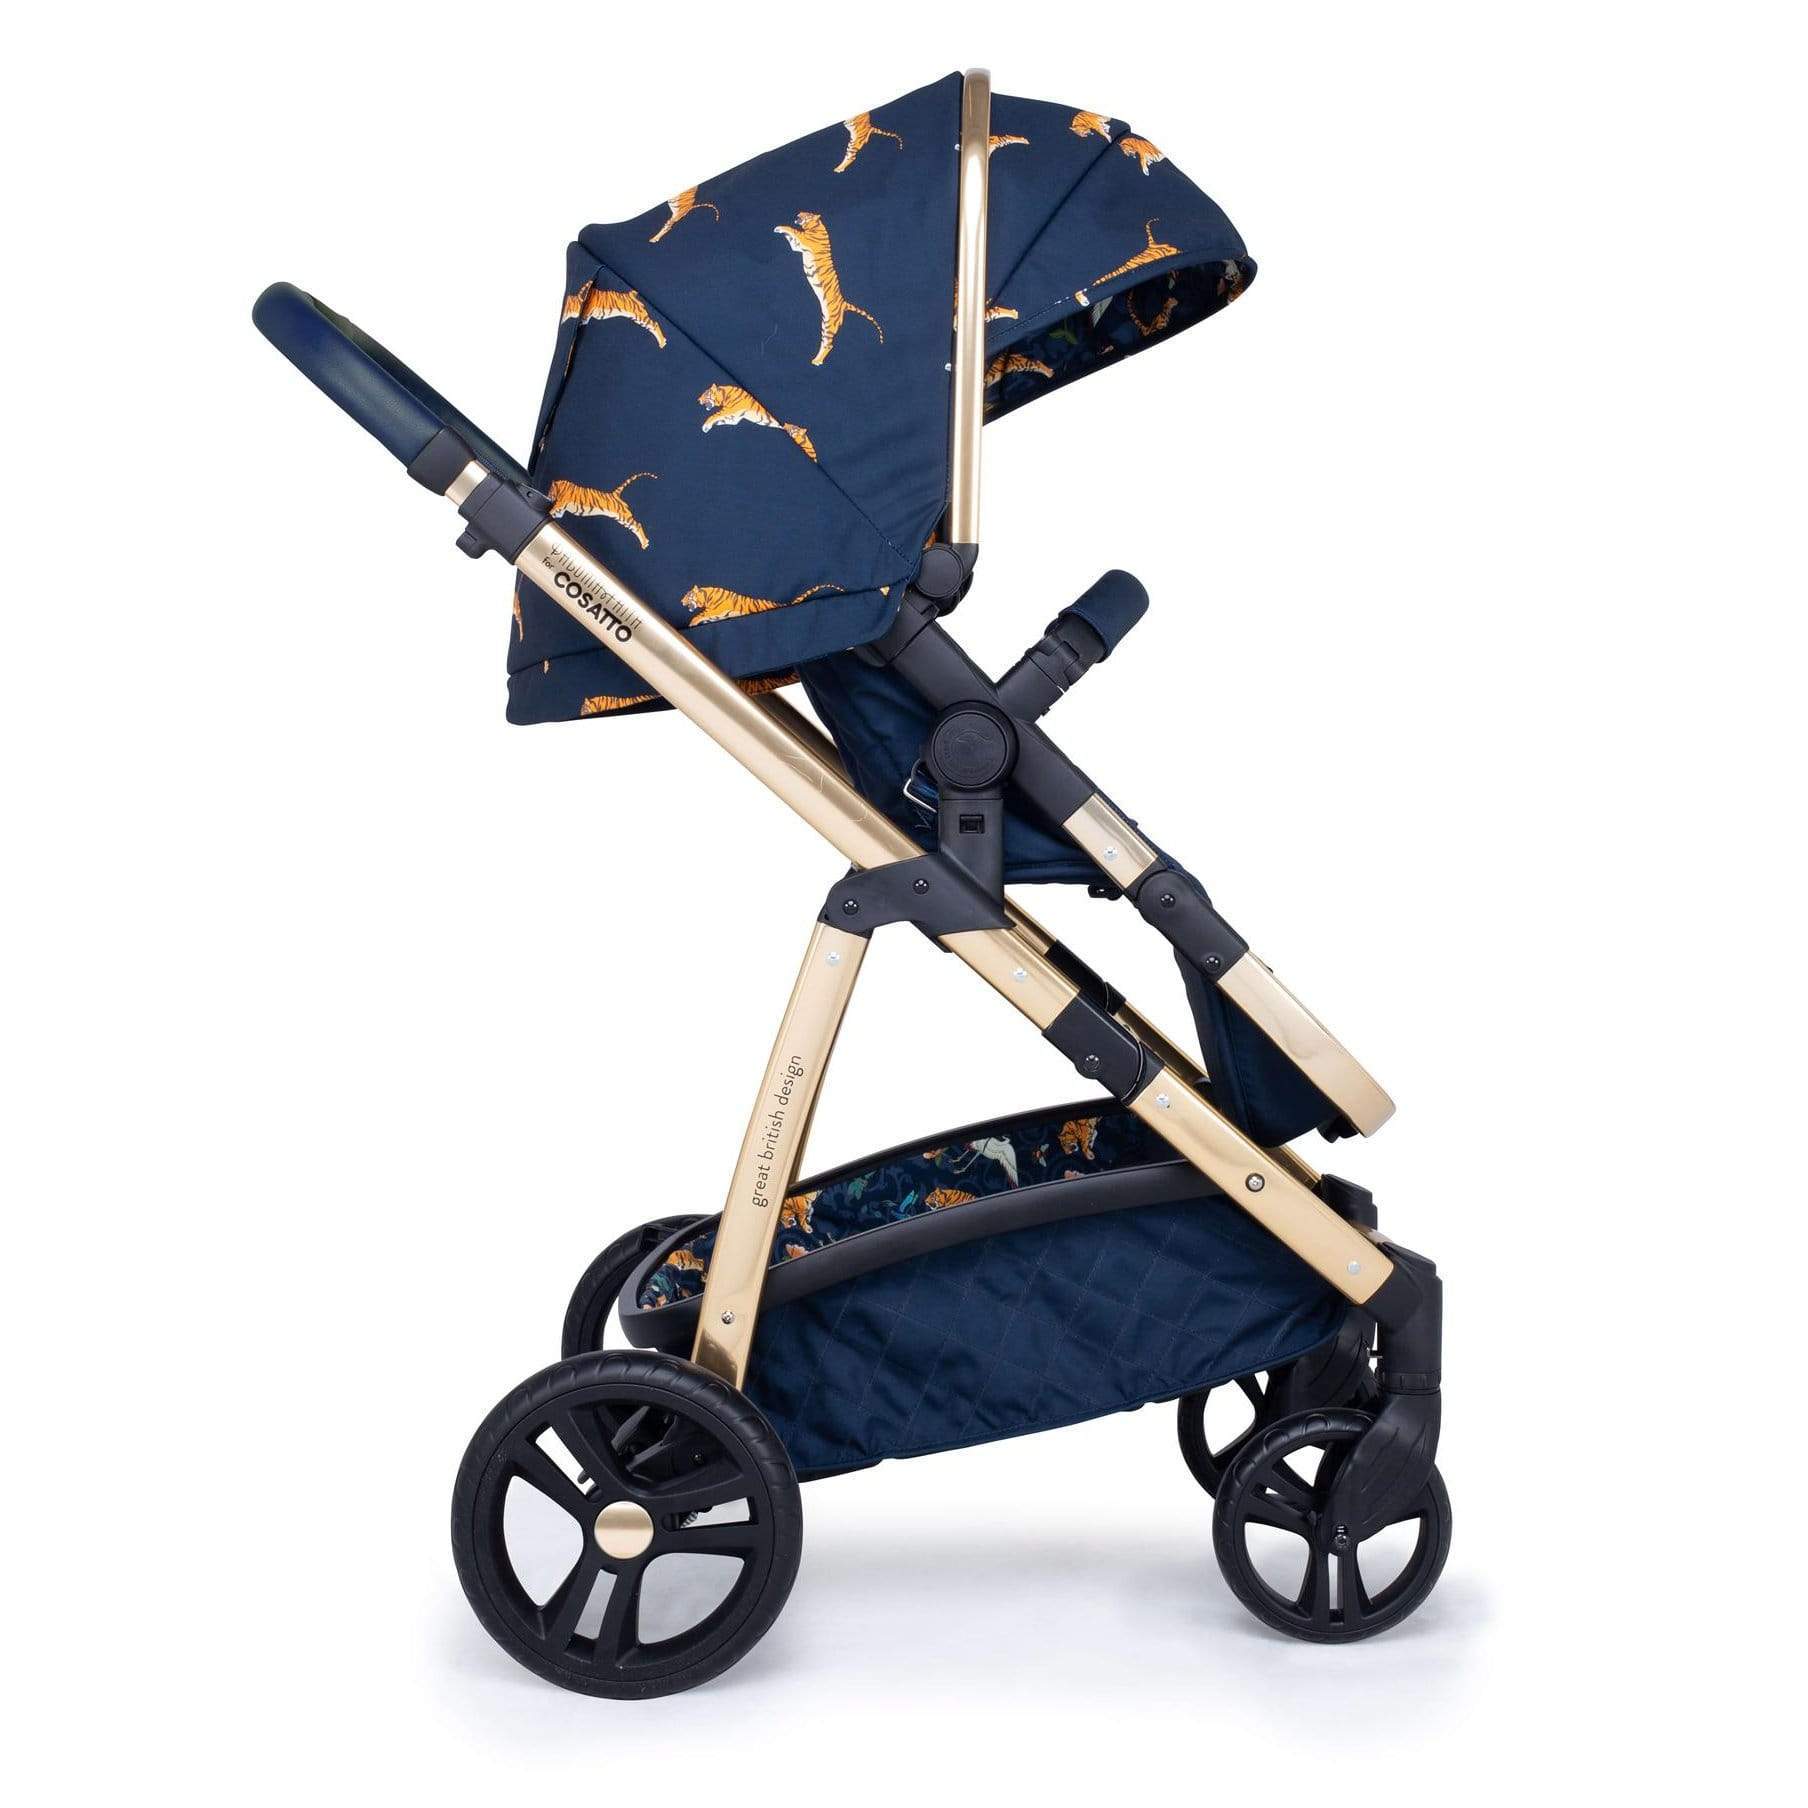 Cosatto travel systems Cosatto Wow 2 Acorn Everything Travel System On The Prowl Special Edition CT5310